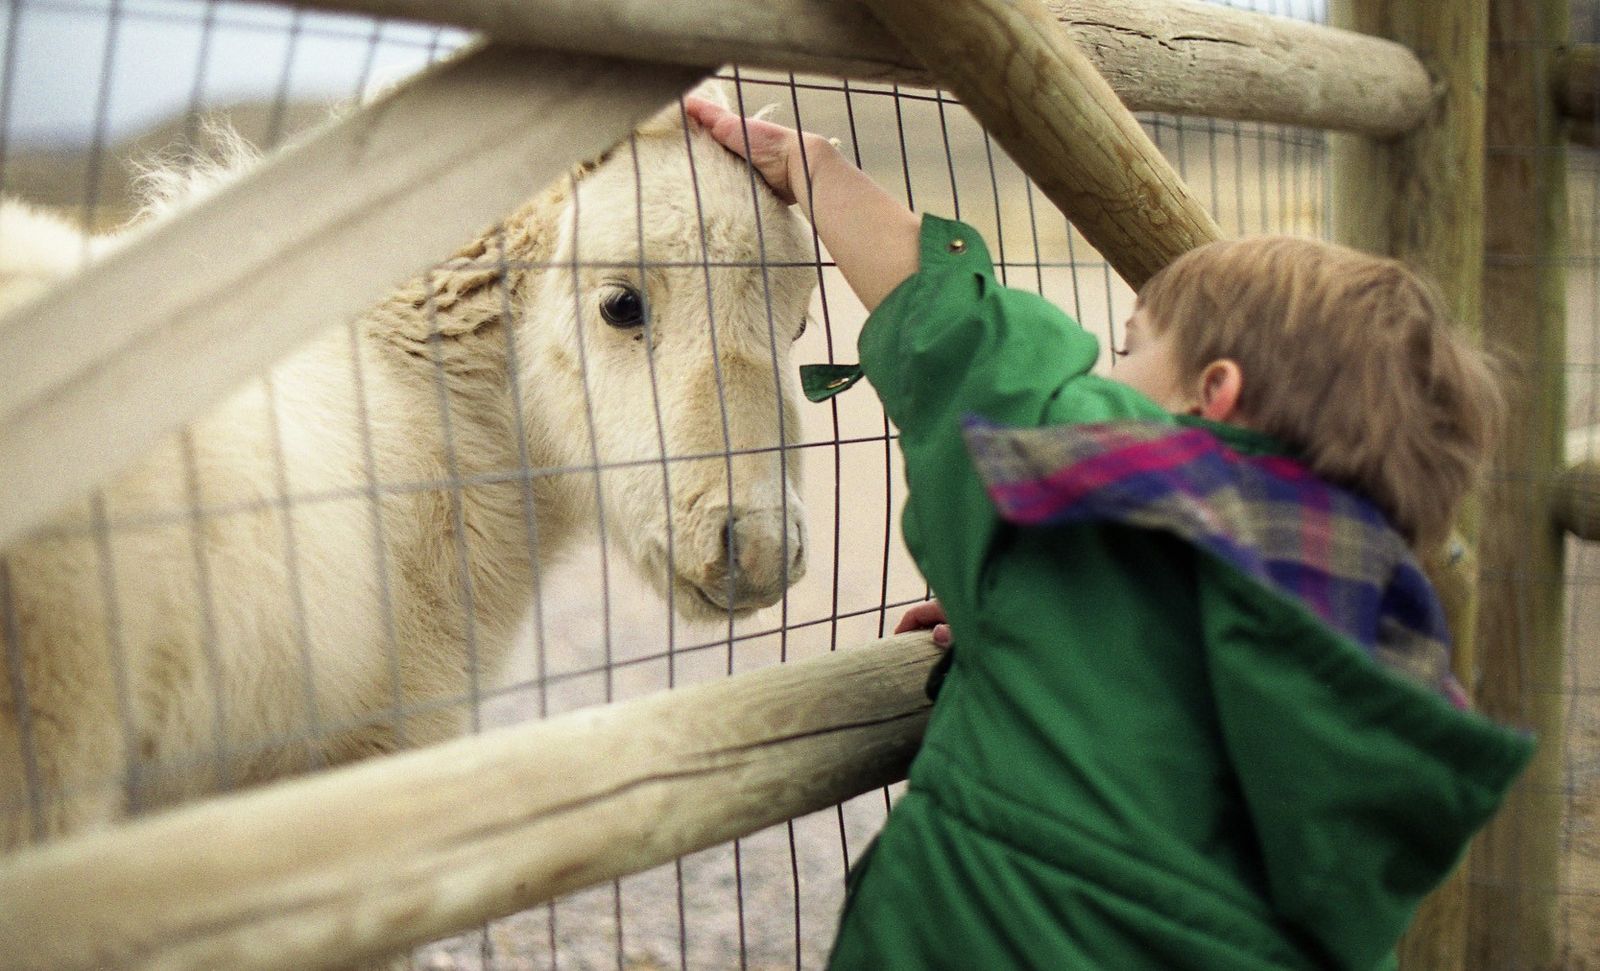 A young boy petting a goat at a petting zoo.